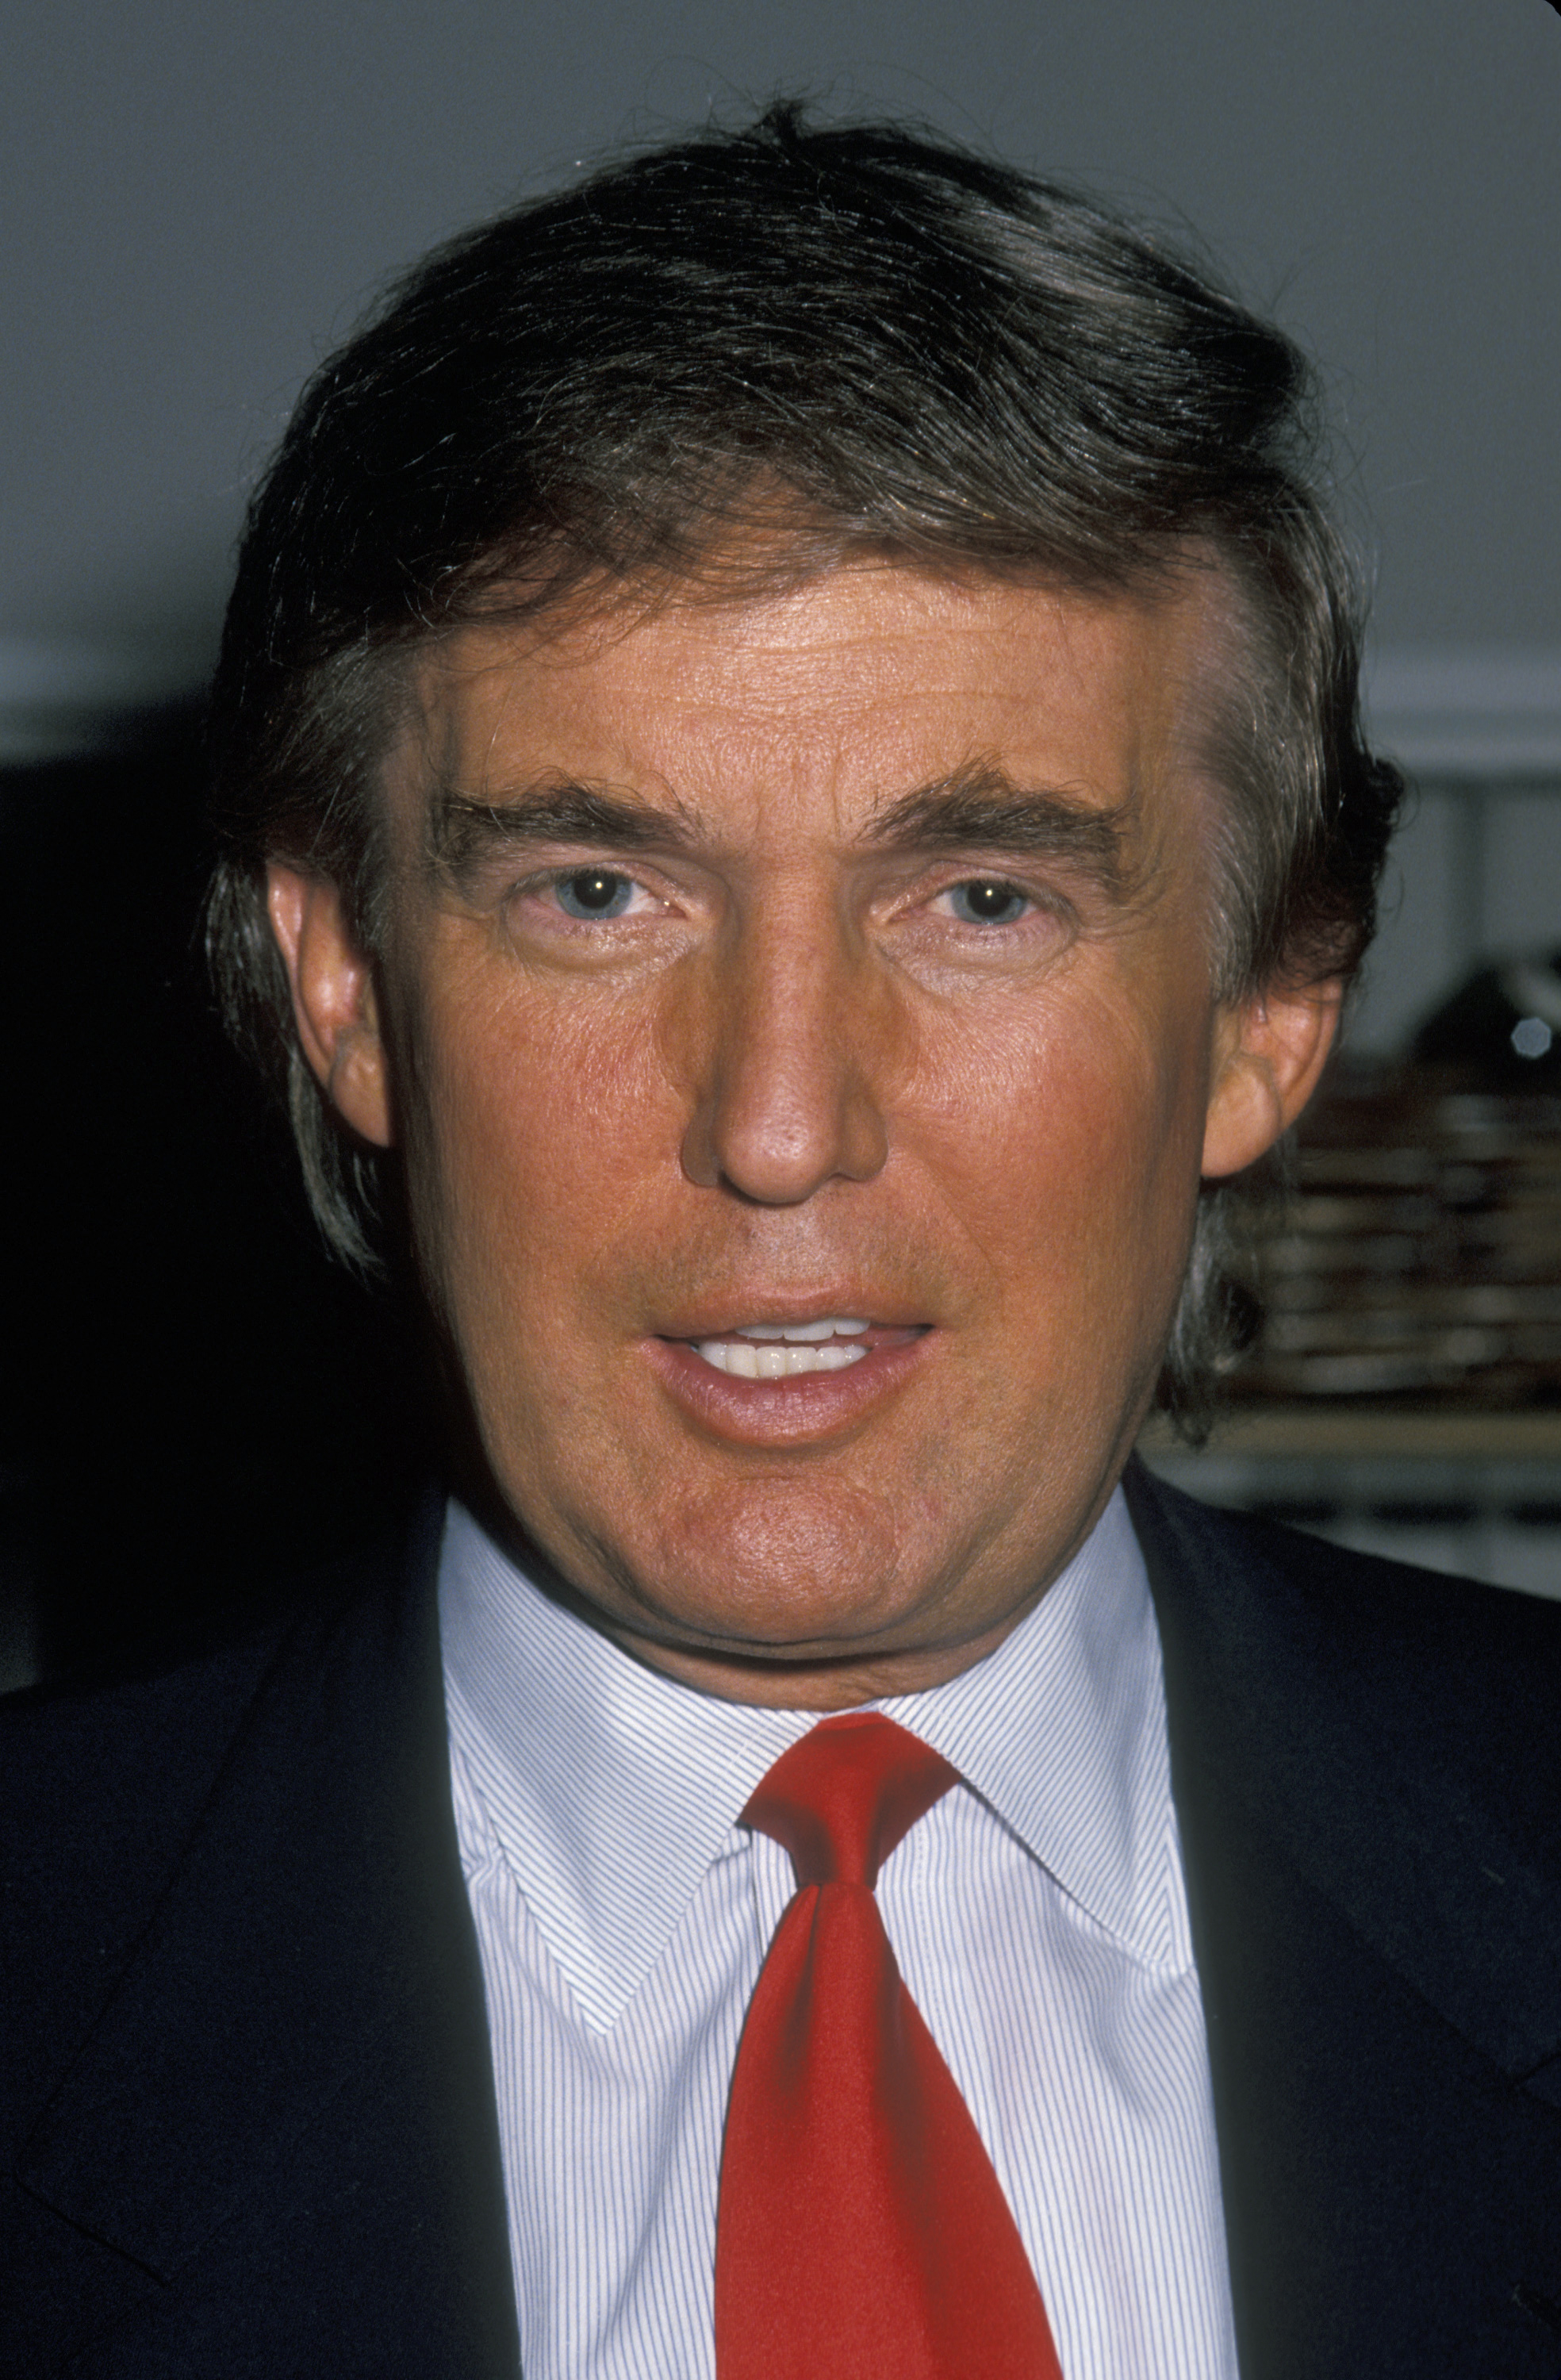 Close-up of Trump in a suit and tie